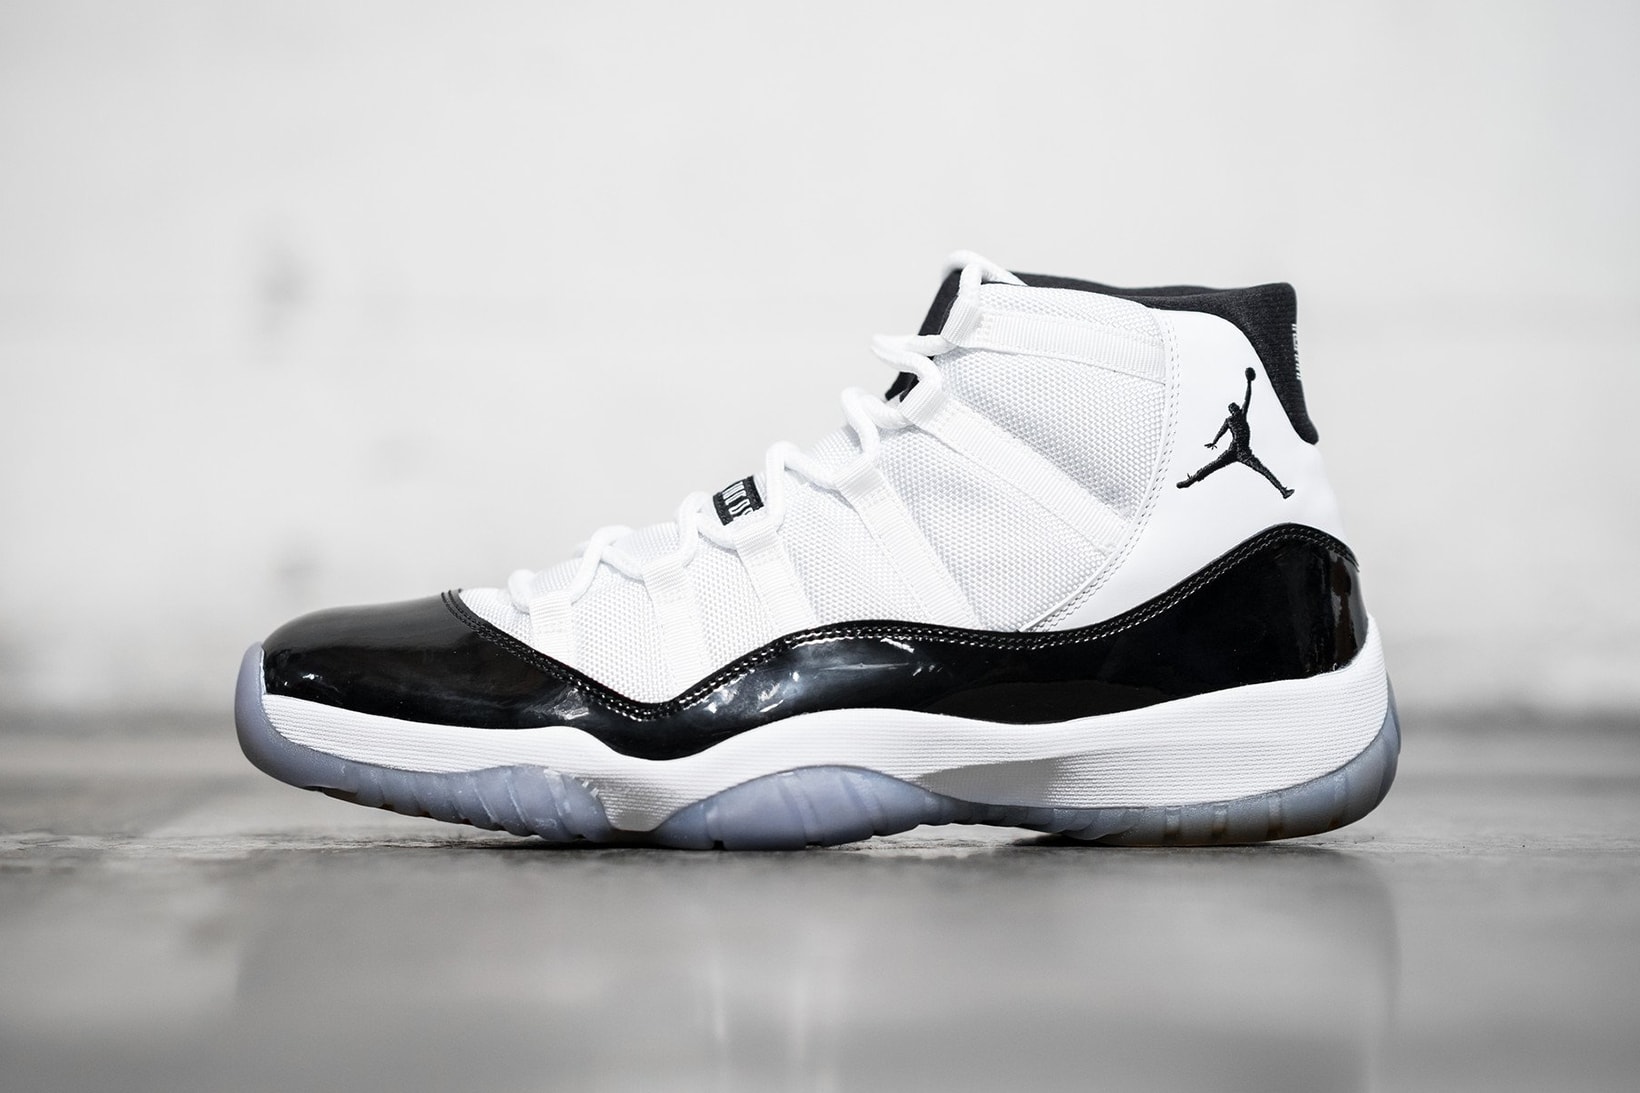 True OG: The Air Jordan Retro 11 'Concord' Will Take You Back To